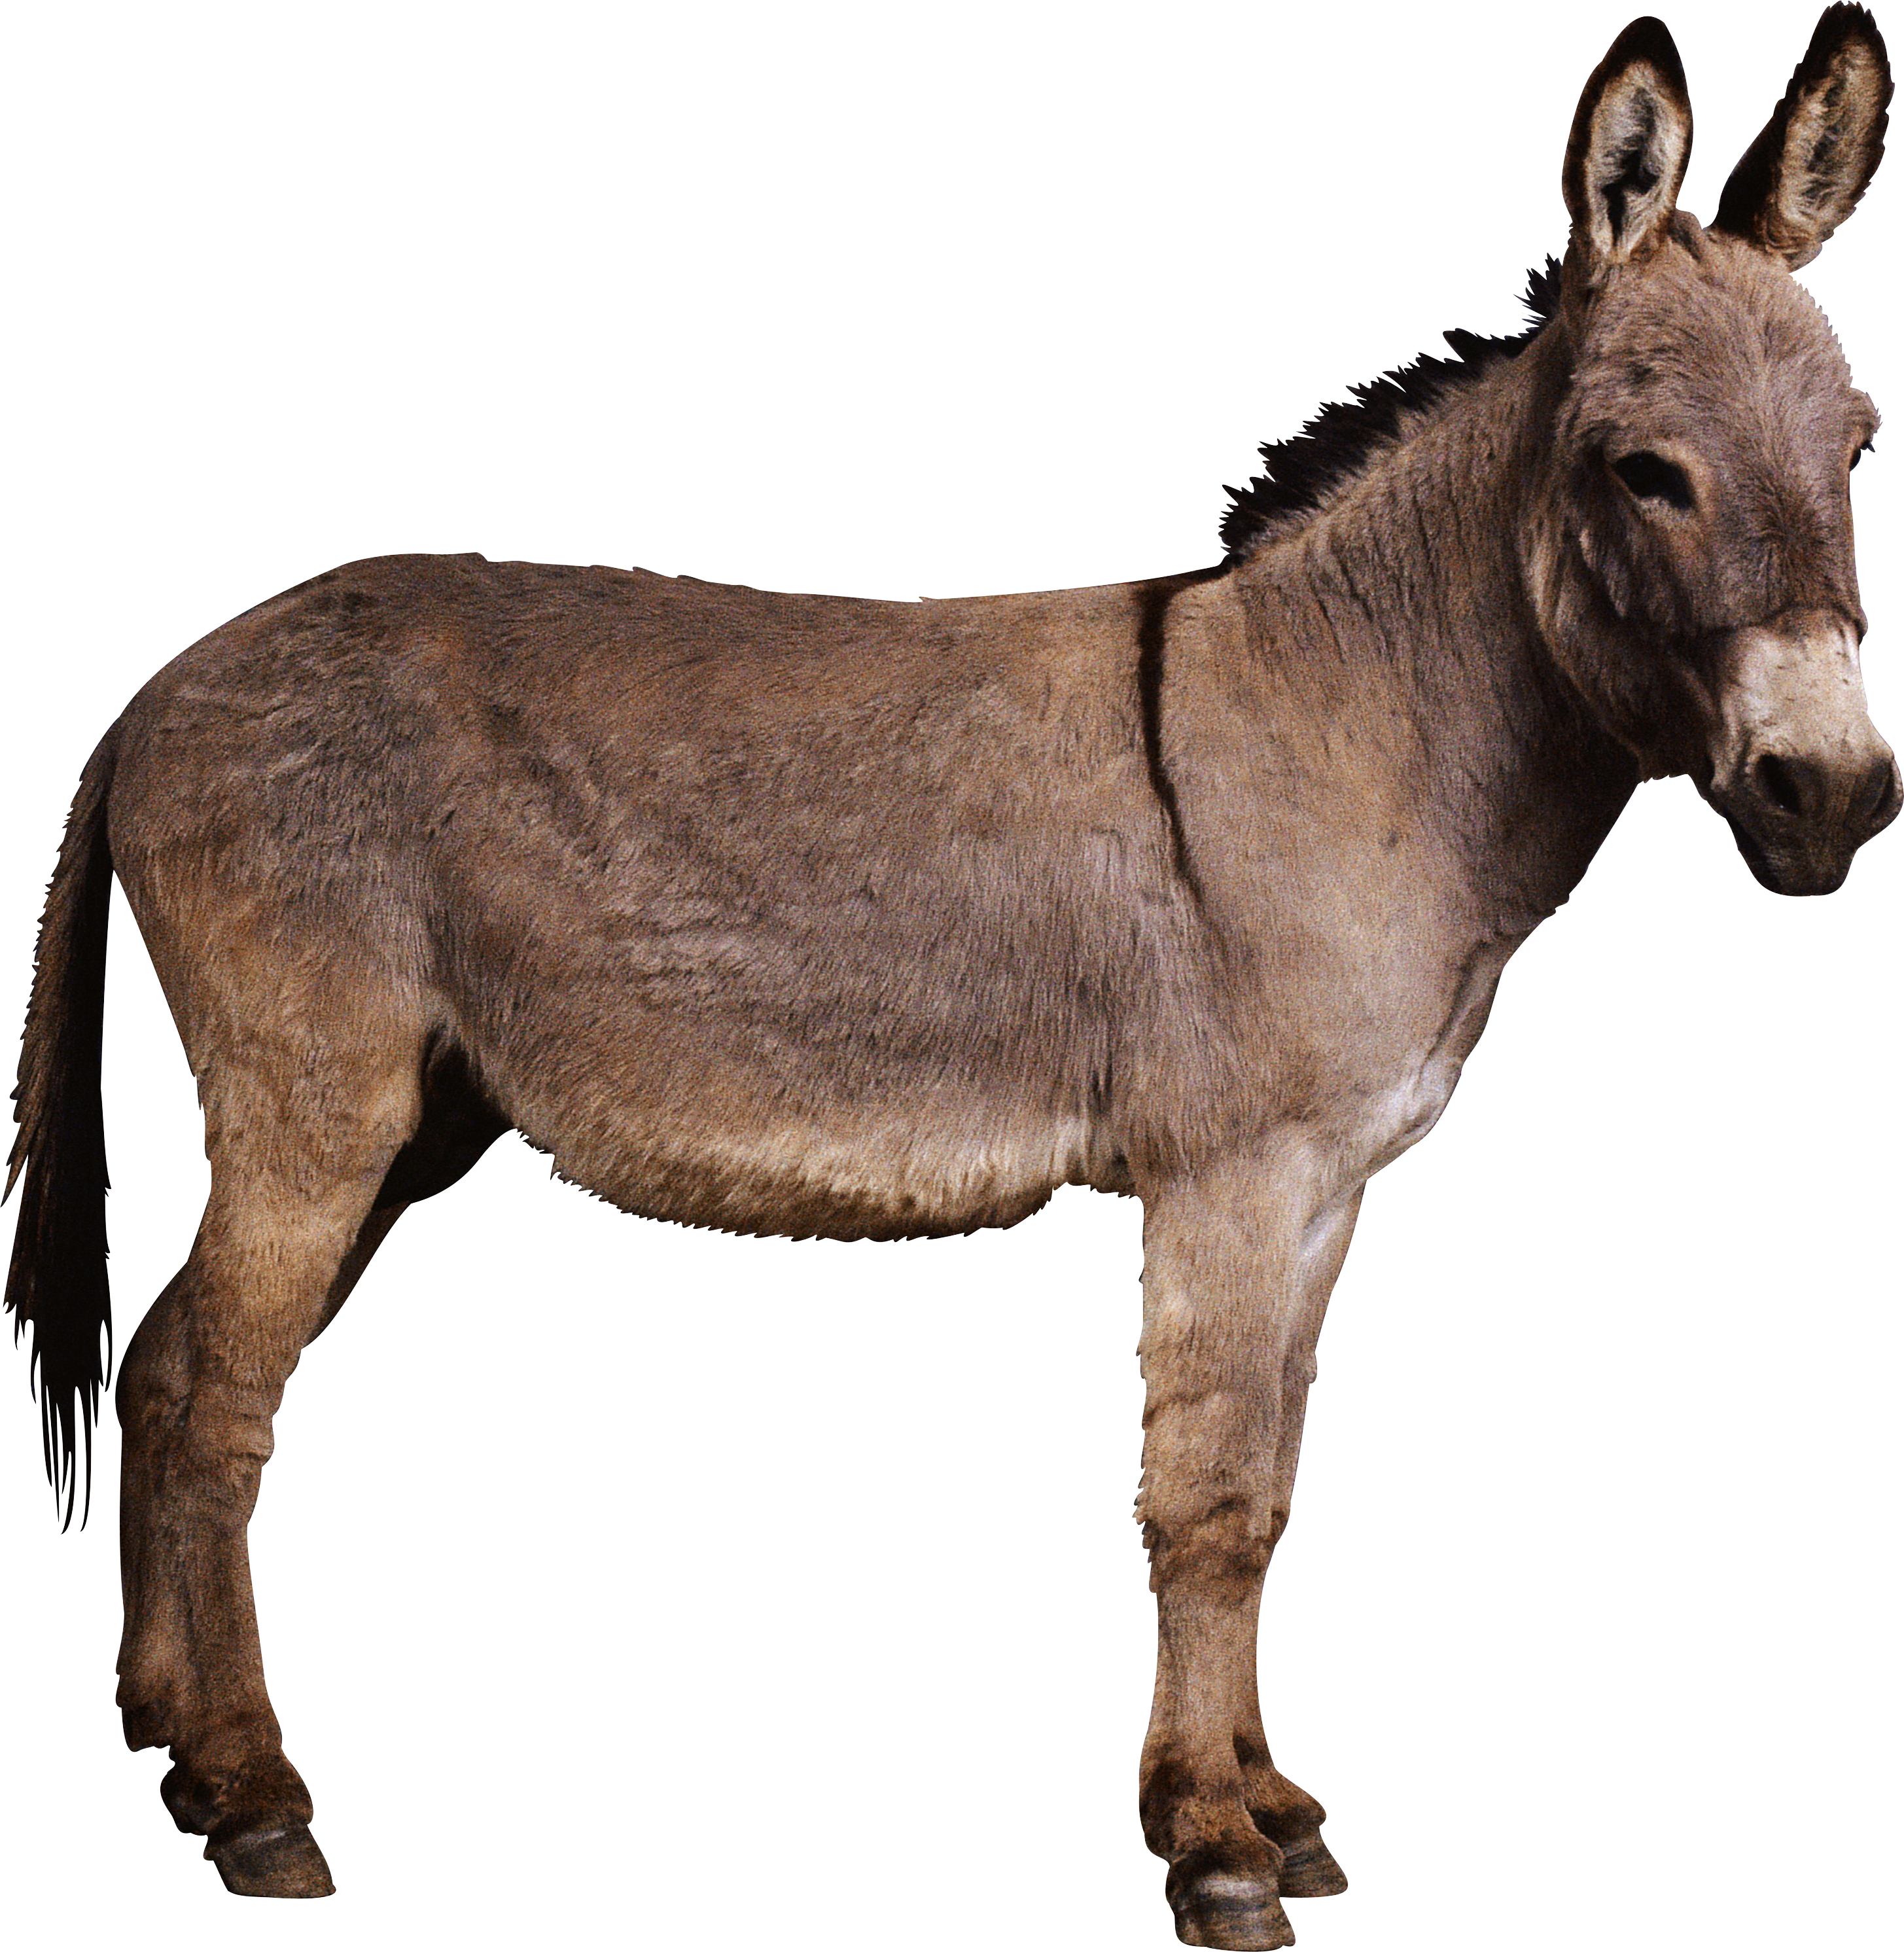 Donkey PNG images free download.